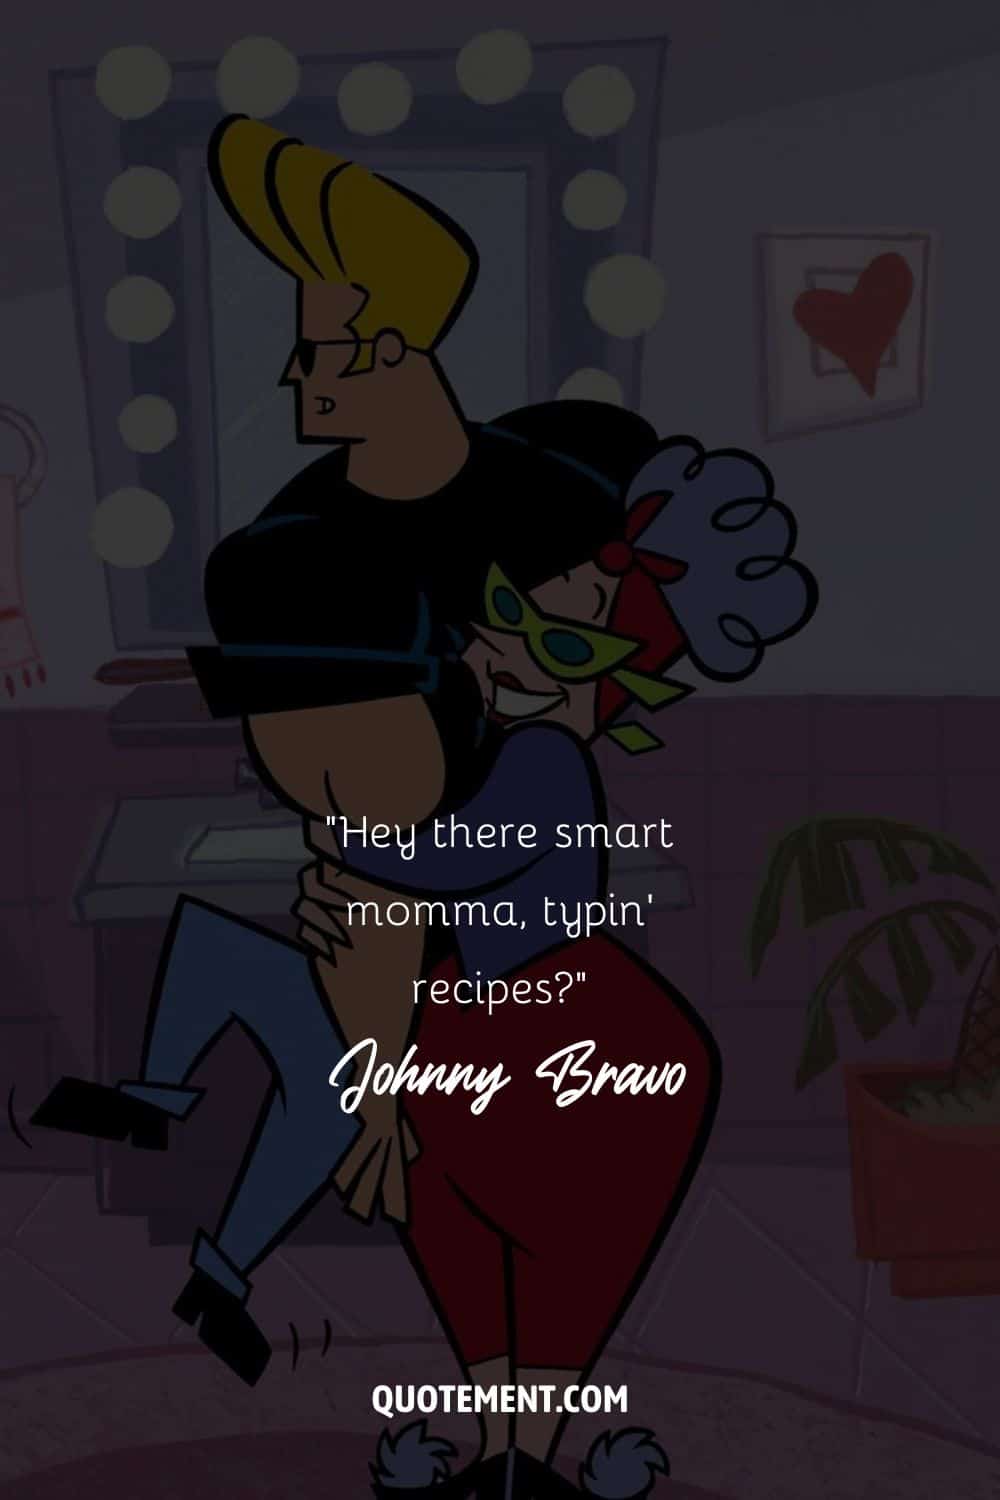 Johnny Bravo being grabbed and hugged by his mom
